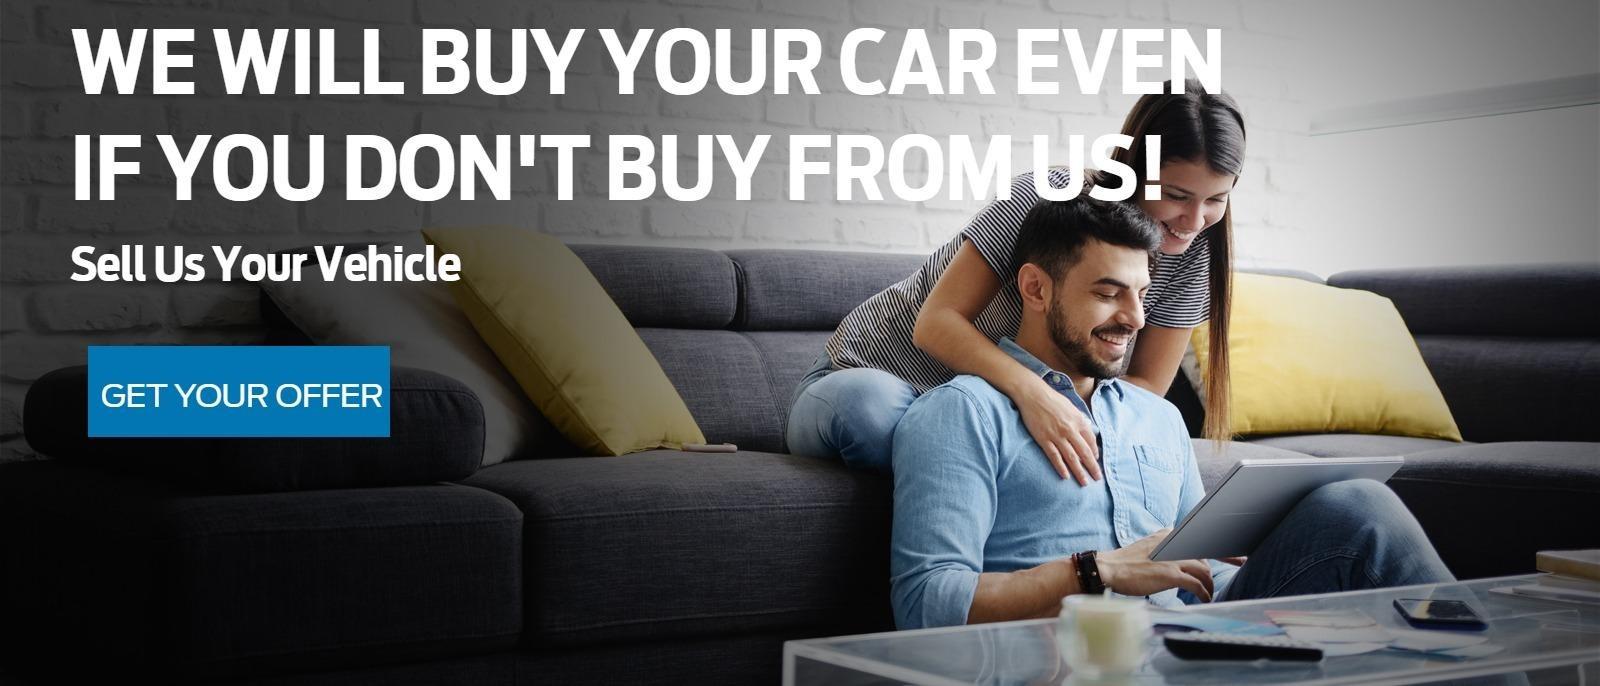 PRESTON CHEVROLET IN BURTON, OH WILL BUY YOUR CAR EVEN IF YOU DON'T BUY FROM US!